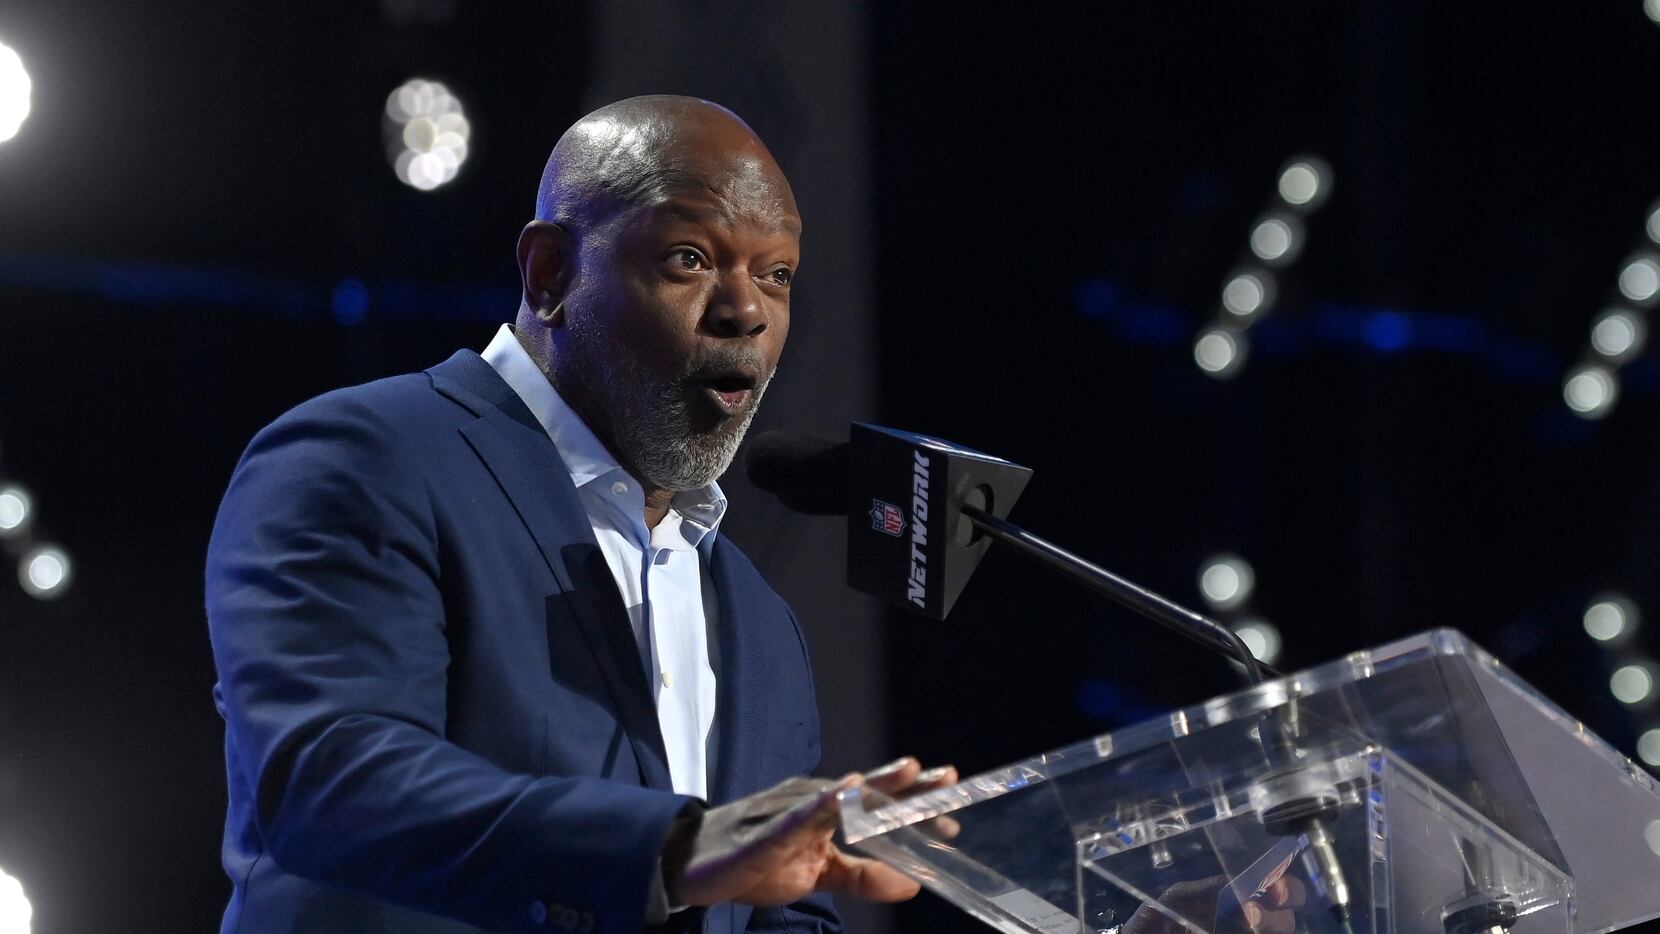 2022 NFL Draft: Emmitt Smith to announce Dallas Cowboys selection